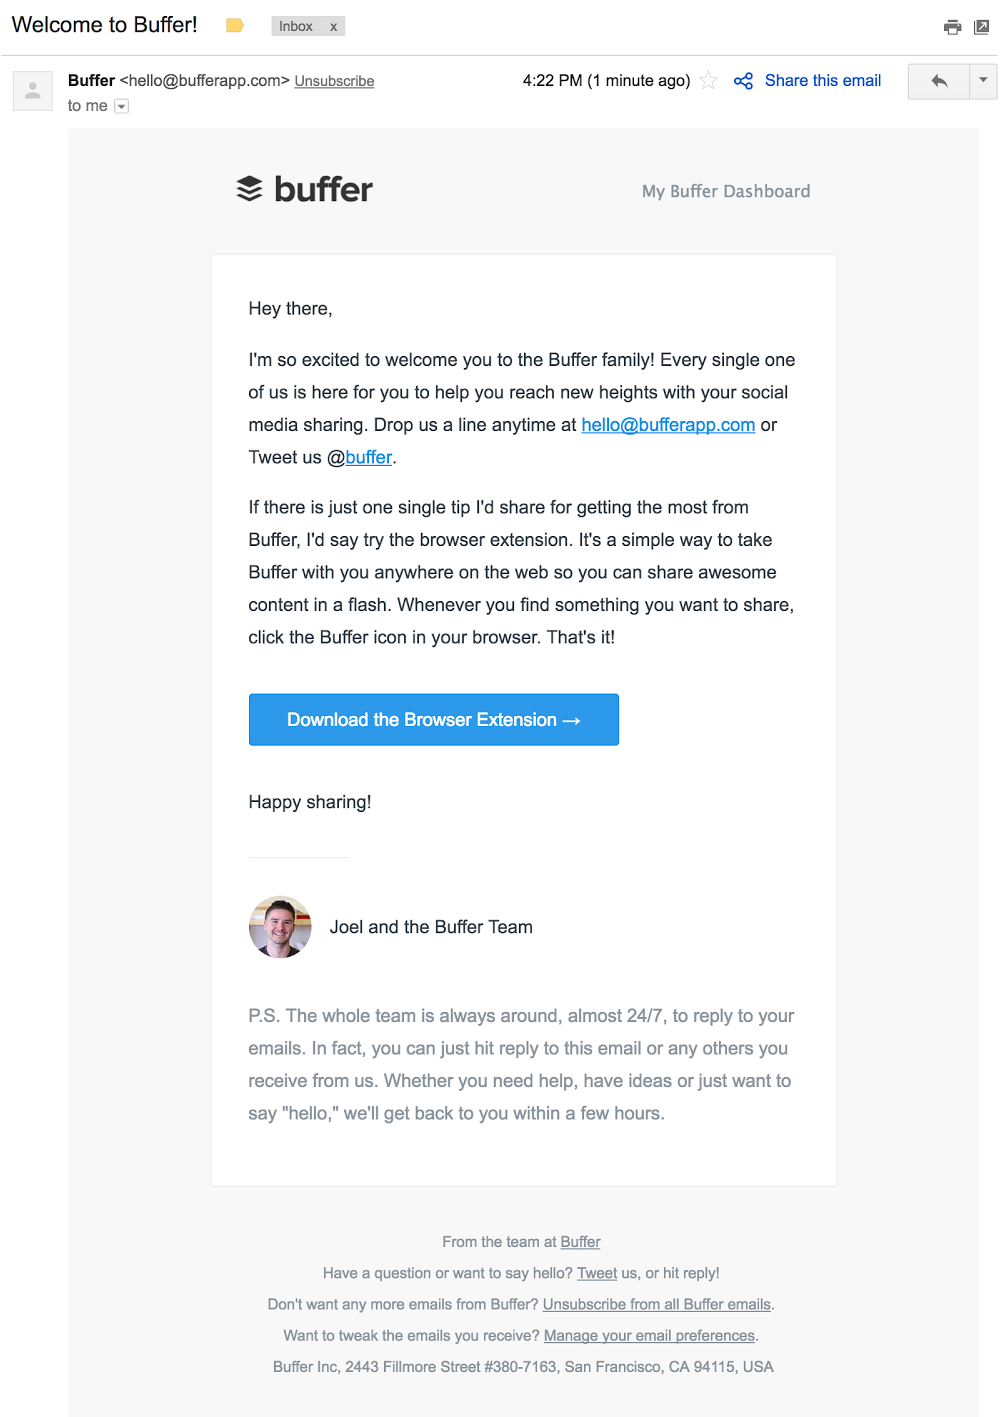 welcome to buffer onboarding email